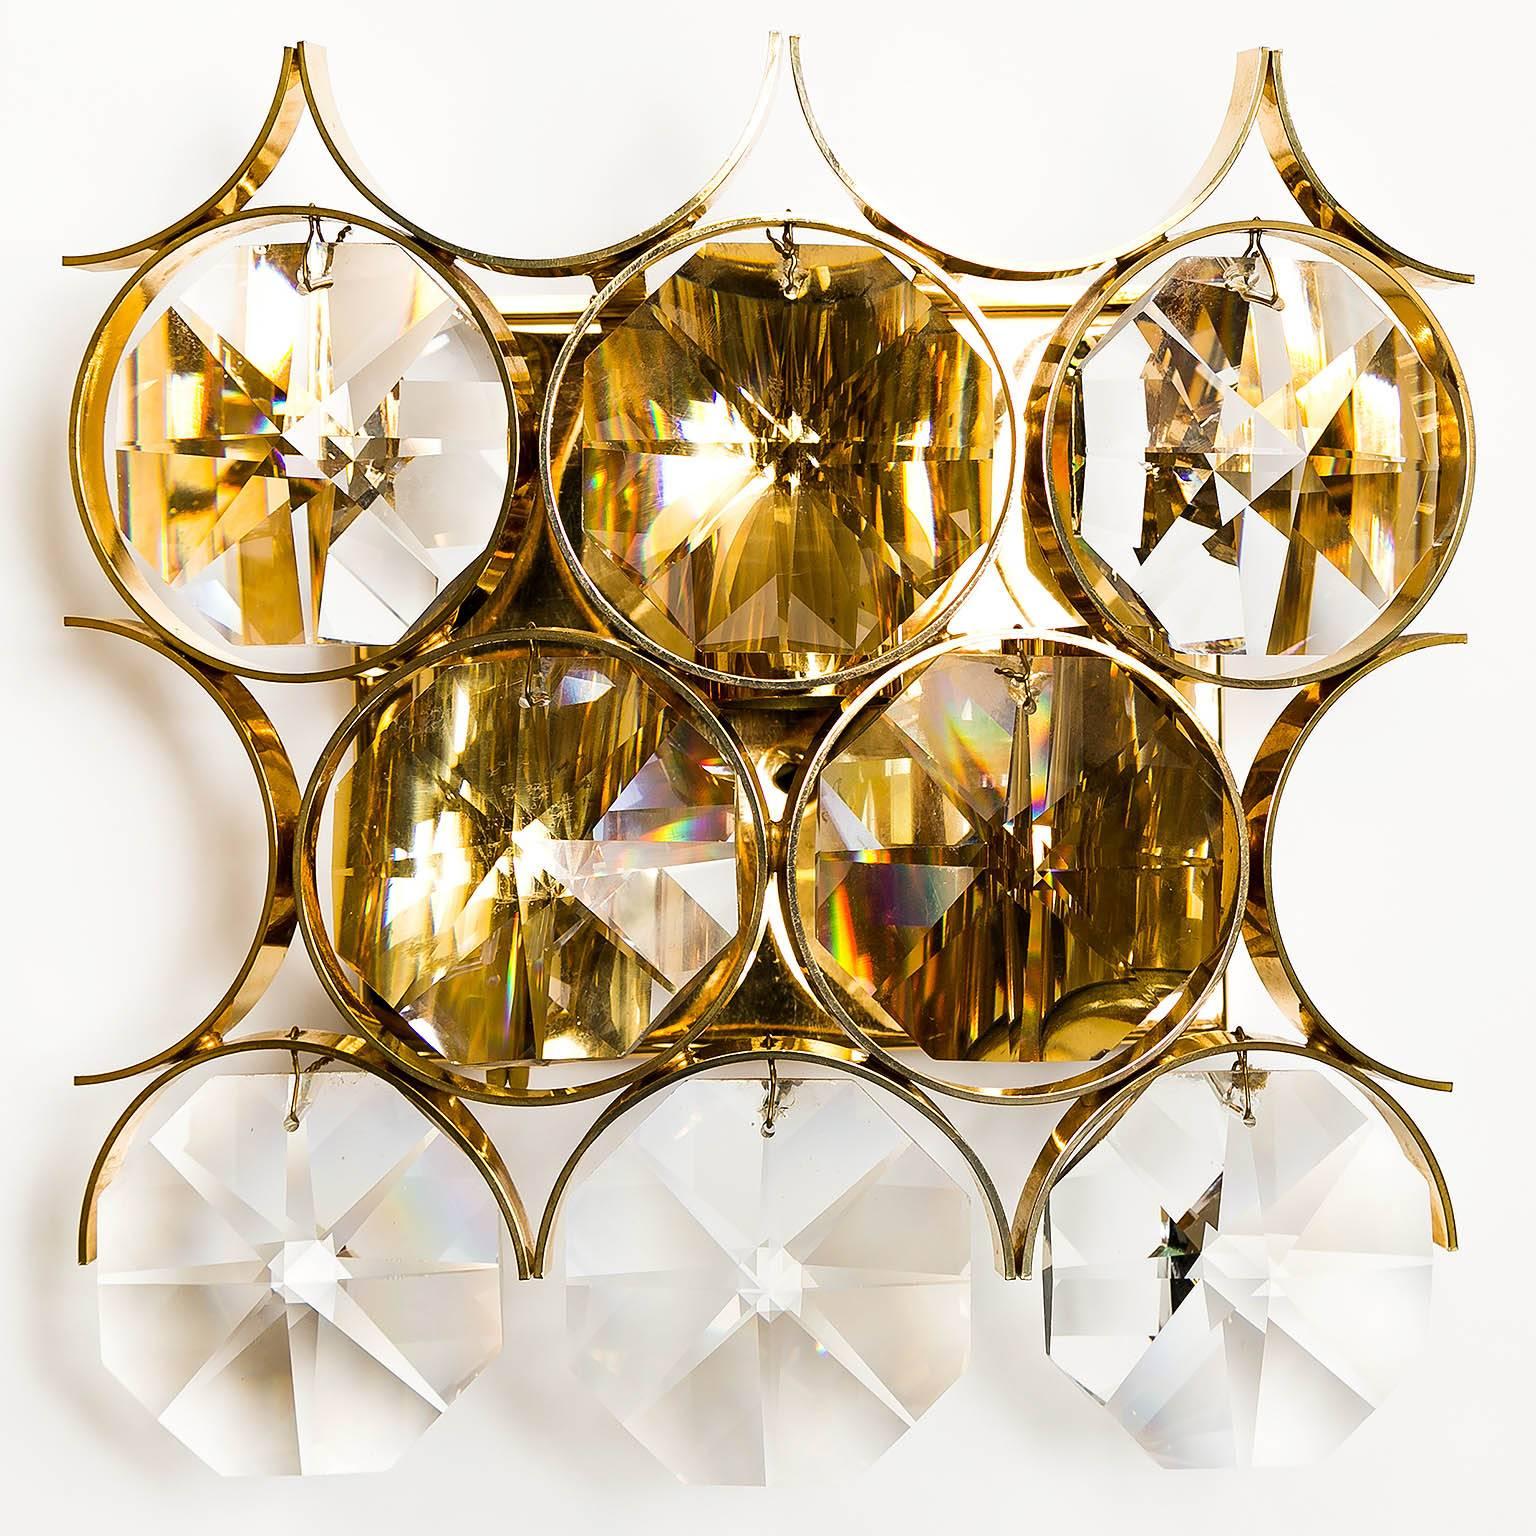 A pair of beautiful wall lights by Palwa (Palme and Walter), Germany, manufactured in midcentury, circa 1970 (1960s-1970s).
The lamp shades are made of gilded / gilt / gold-plated brass rings and large crystal glasses. 
The backplates are made of